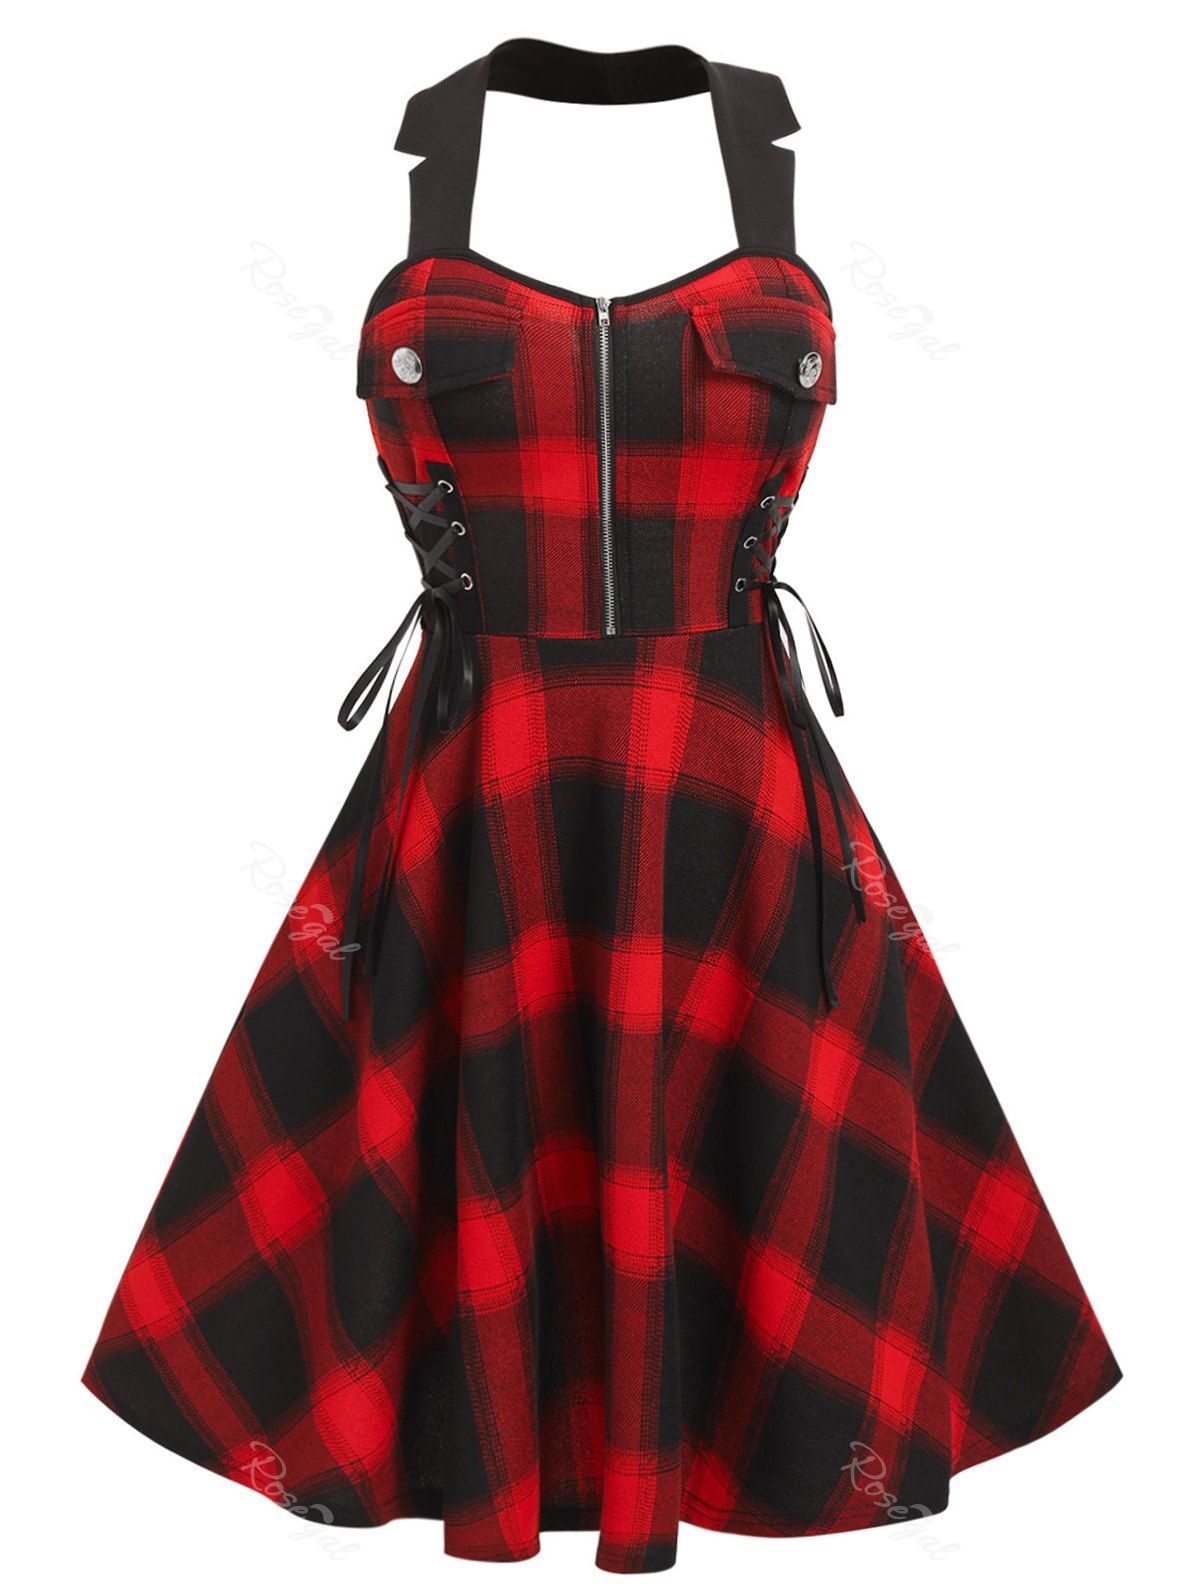 Chic Vintage Backless Lace Up Plaid Dress  